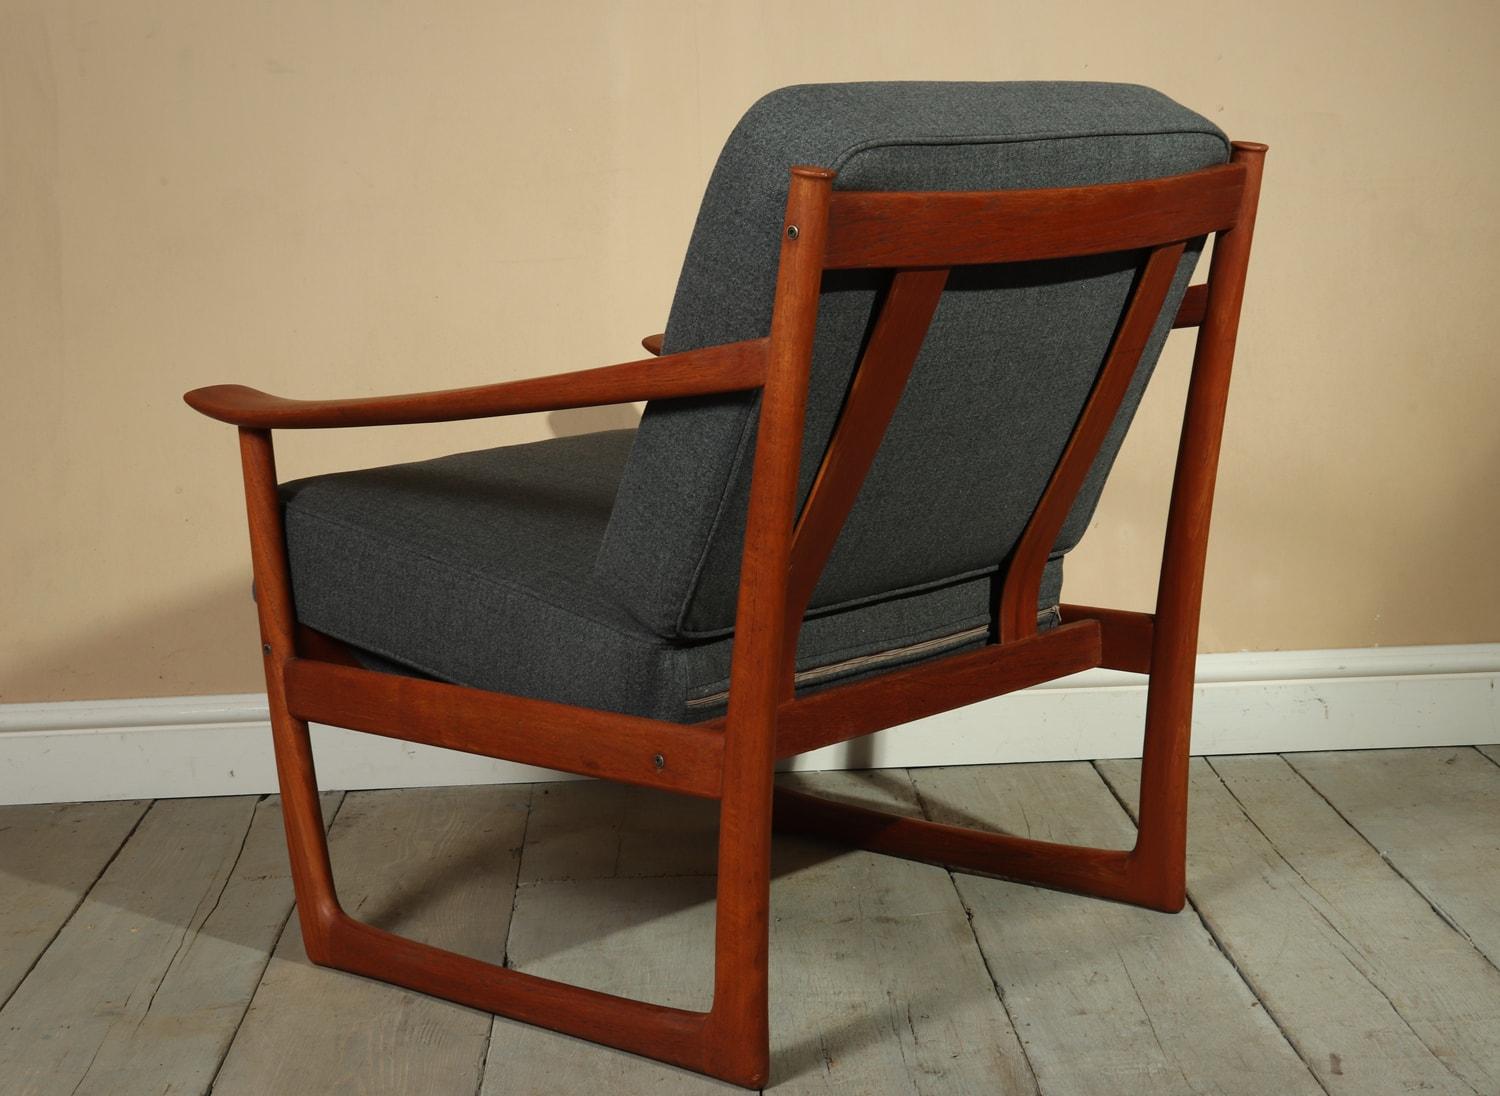 Mid-20th Century Teak Chair Model 130 by Peter Hvidt for France and Son